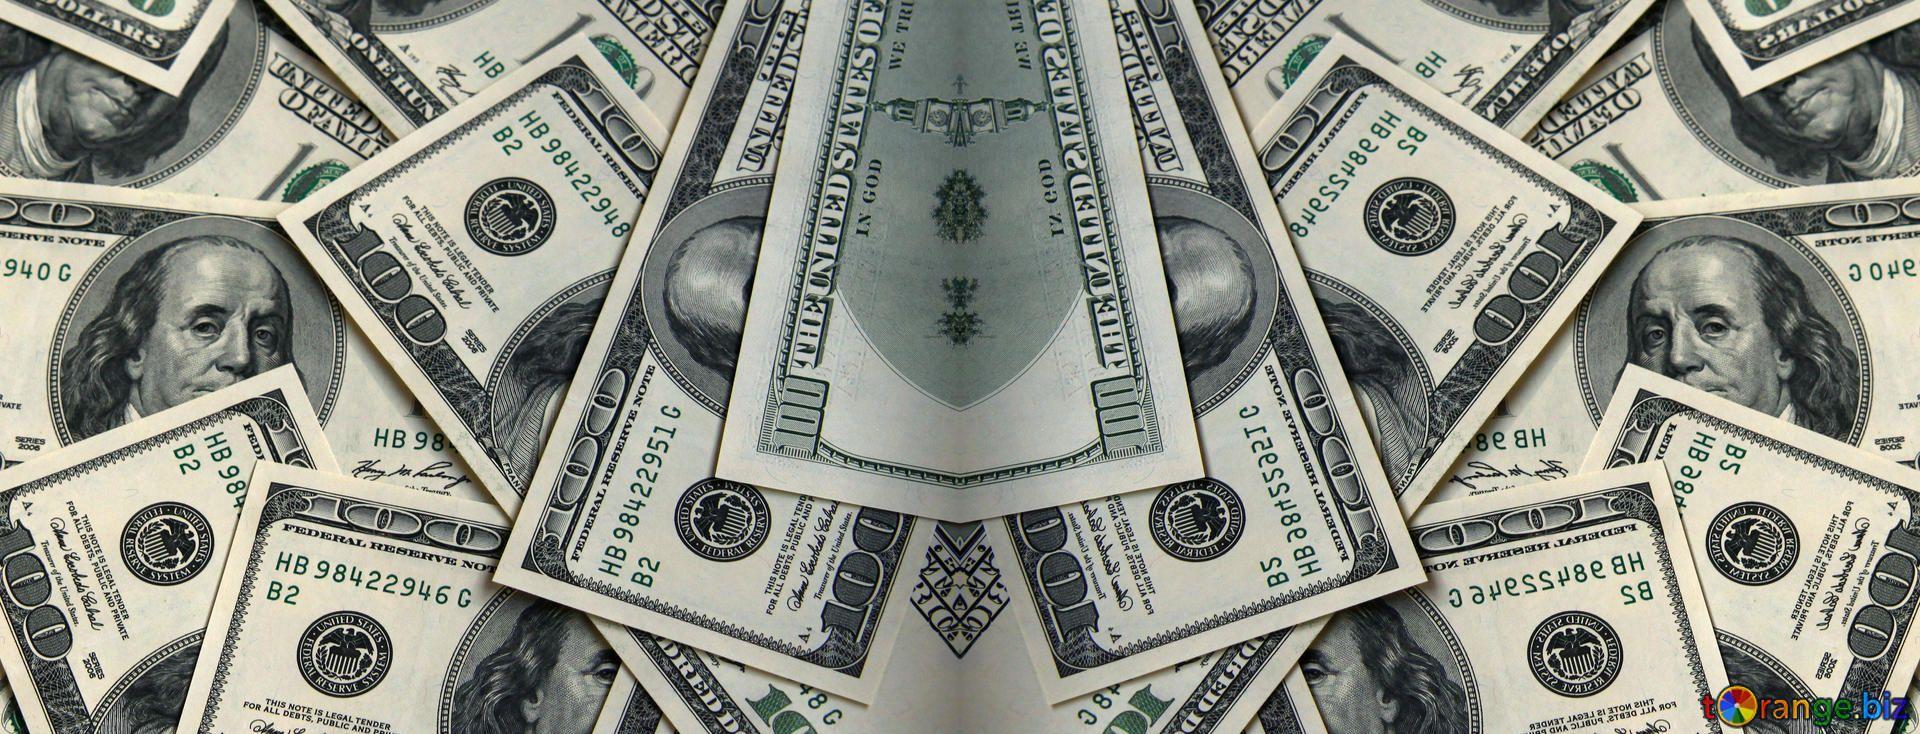 Download Free Picture Dollars On Desktop Wallpaper On CC BY License